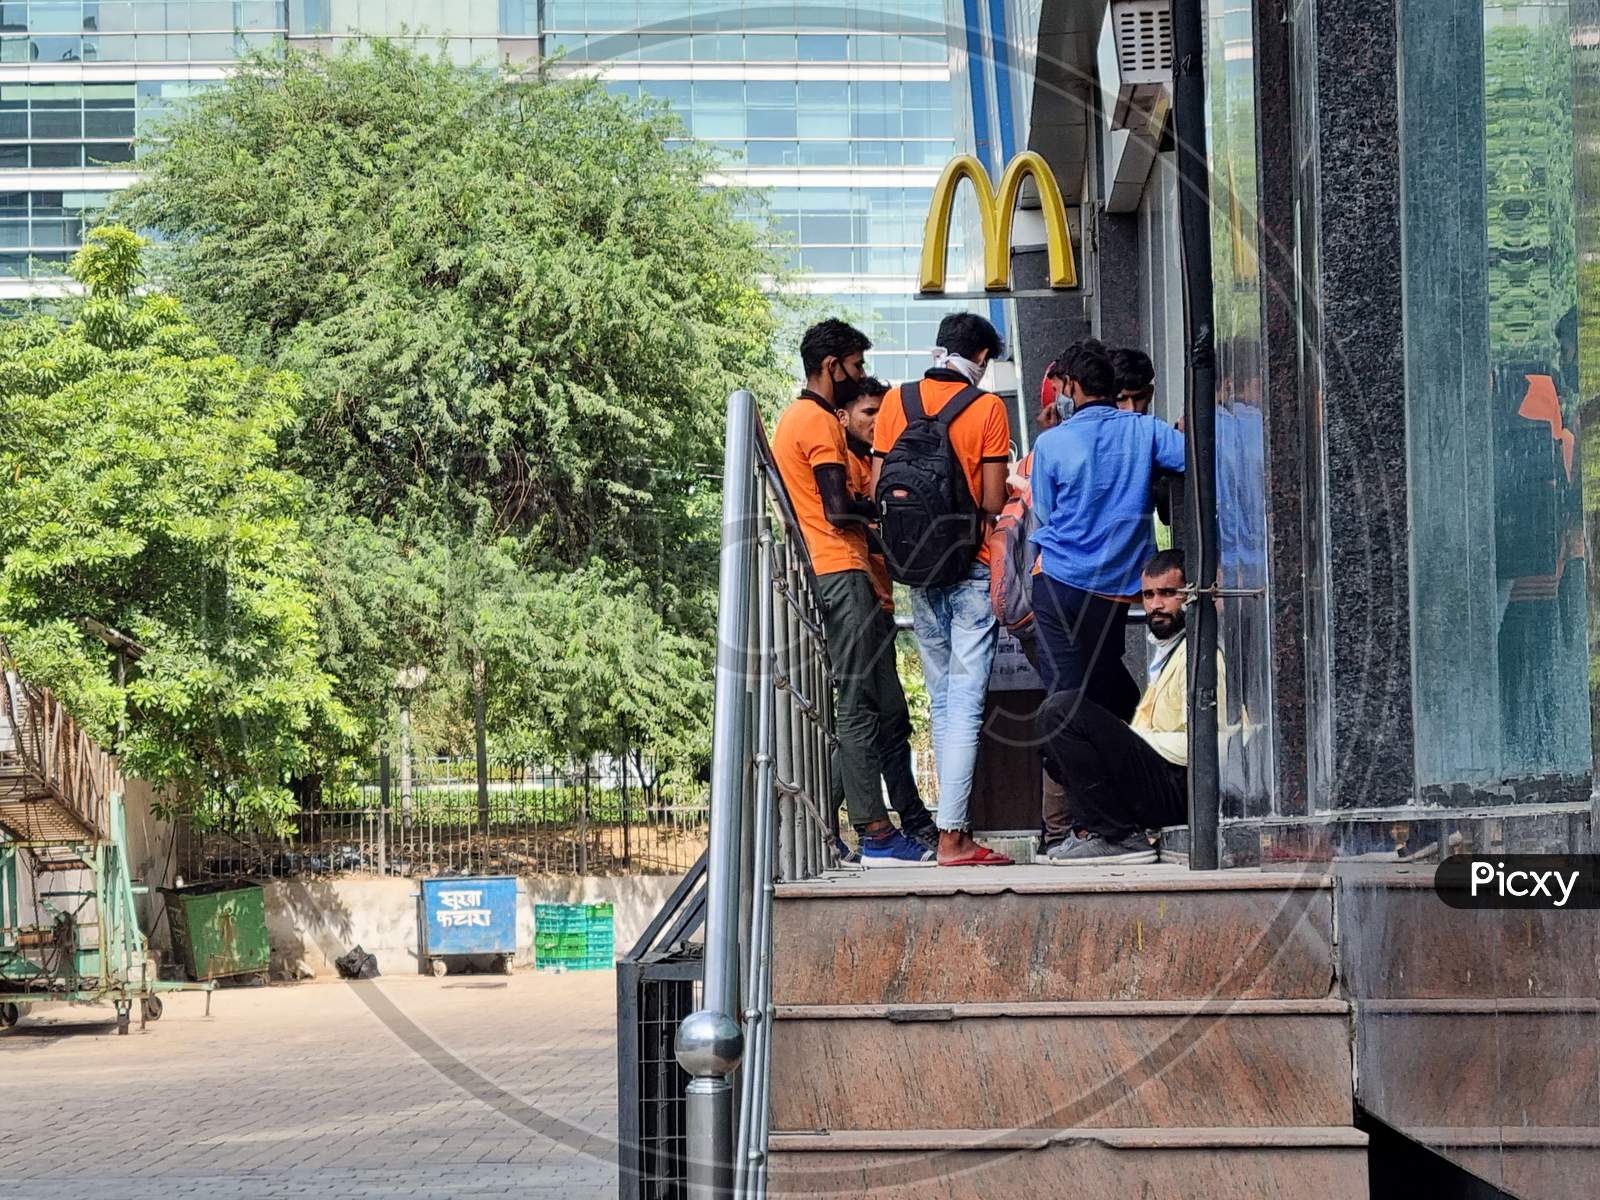 Delivery Boys Riders From Companies Like Swiggy Shadowfax Zomato Standing At A Mcdonalds Takeaway For Online Food Delivery By E-Commerce App Unicorns